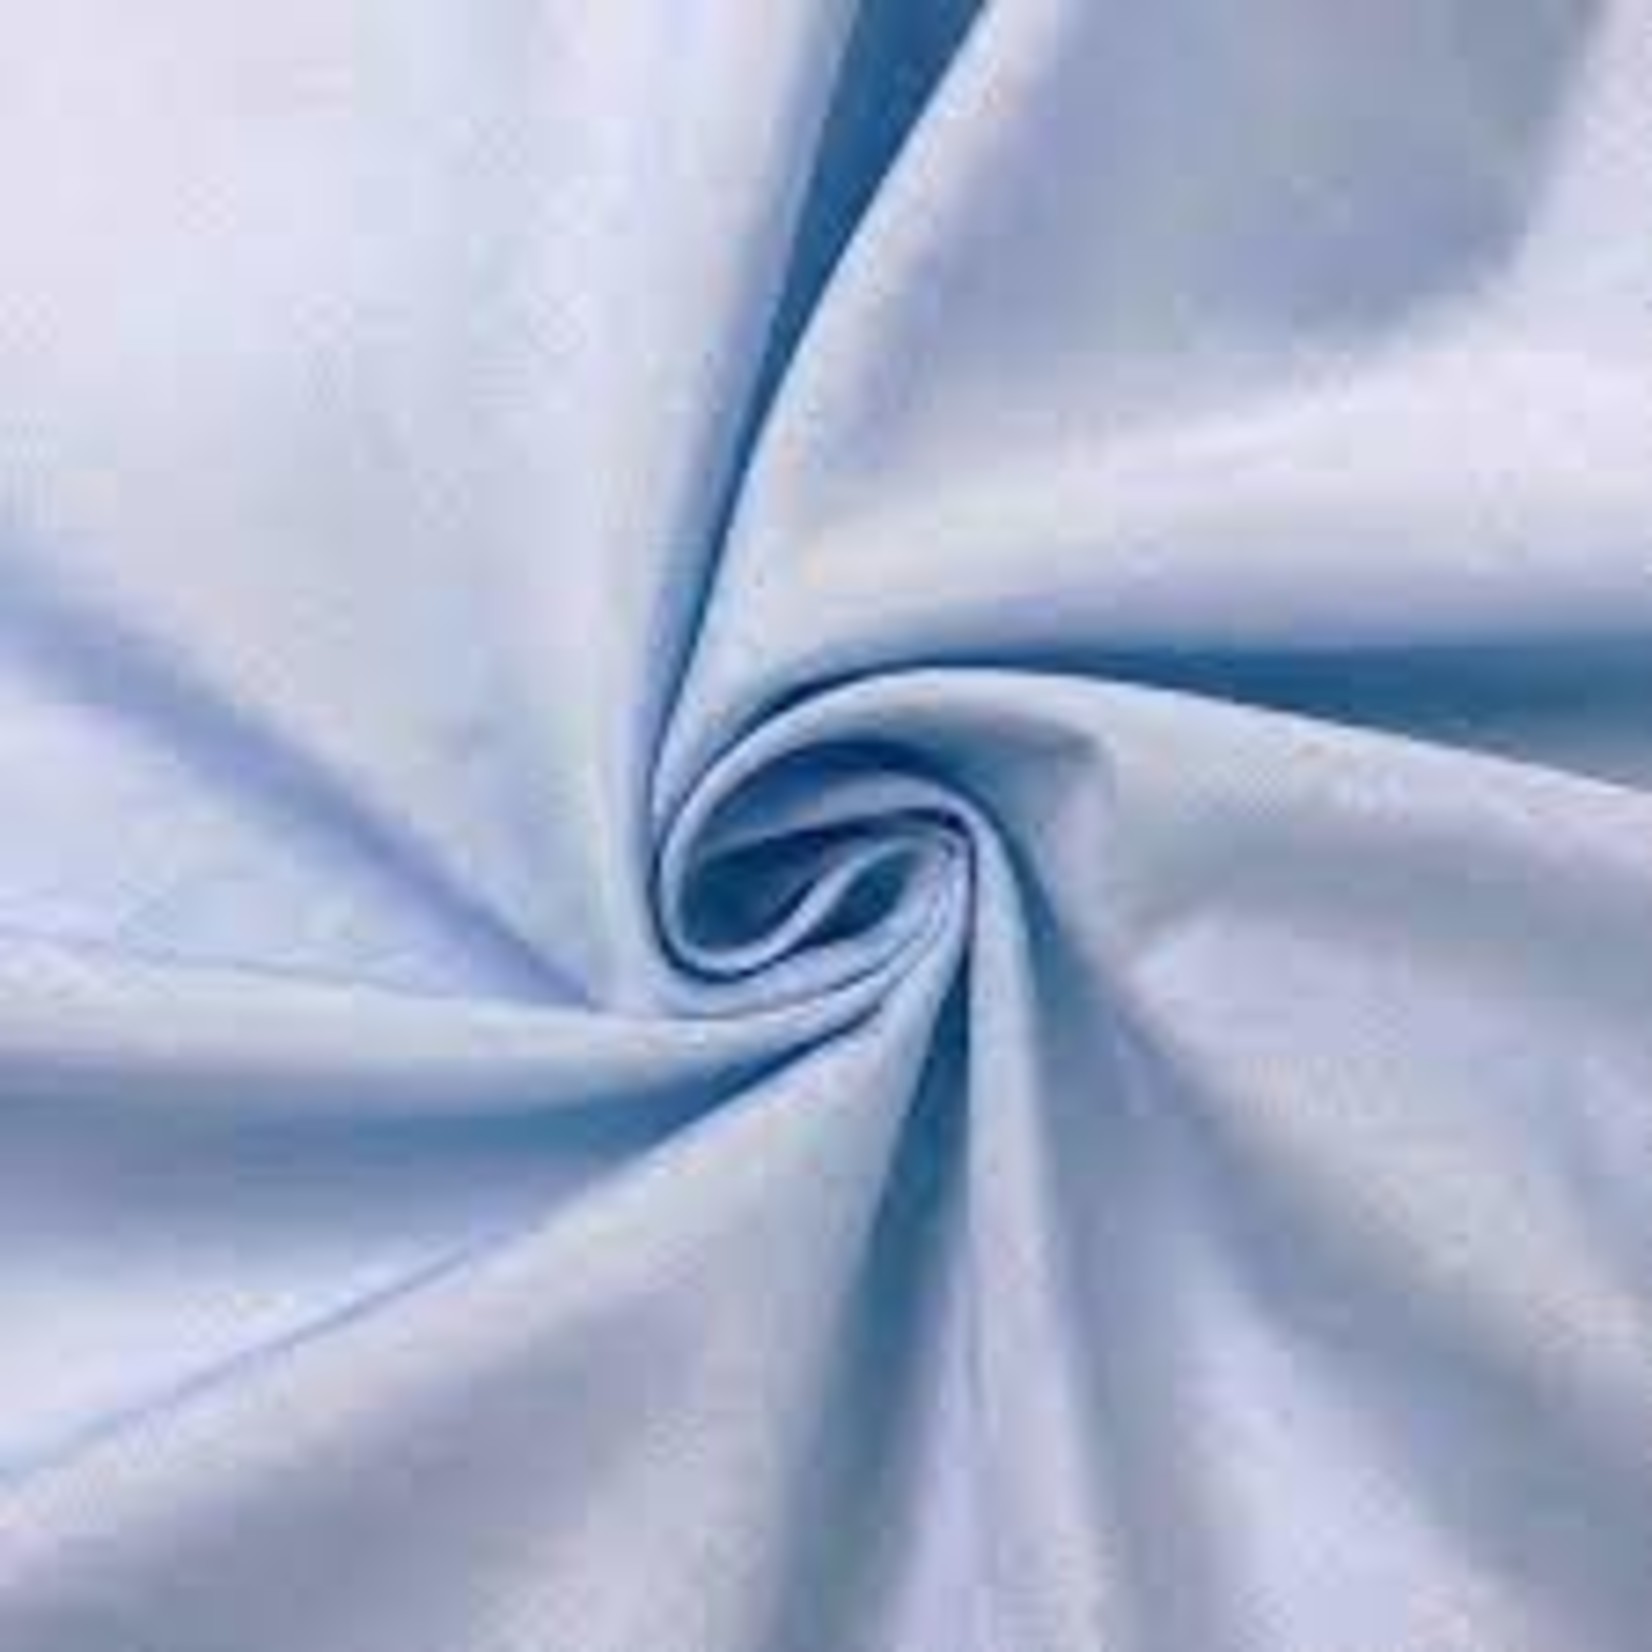 BROADCLOTH 80% POLYESTER / 20% COTTON - PER METER - LIGHT SKY BLUE